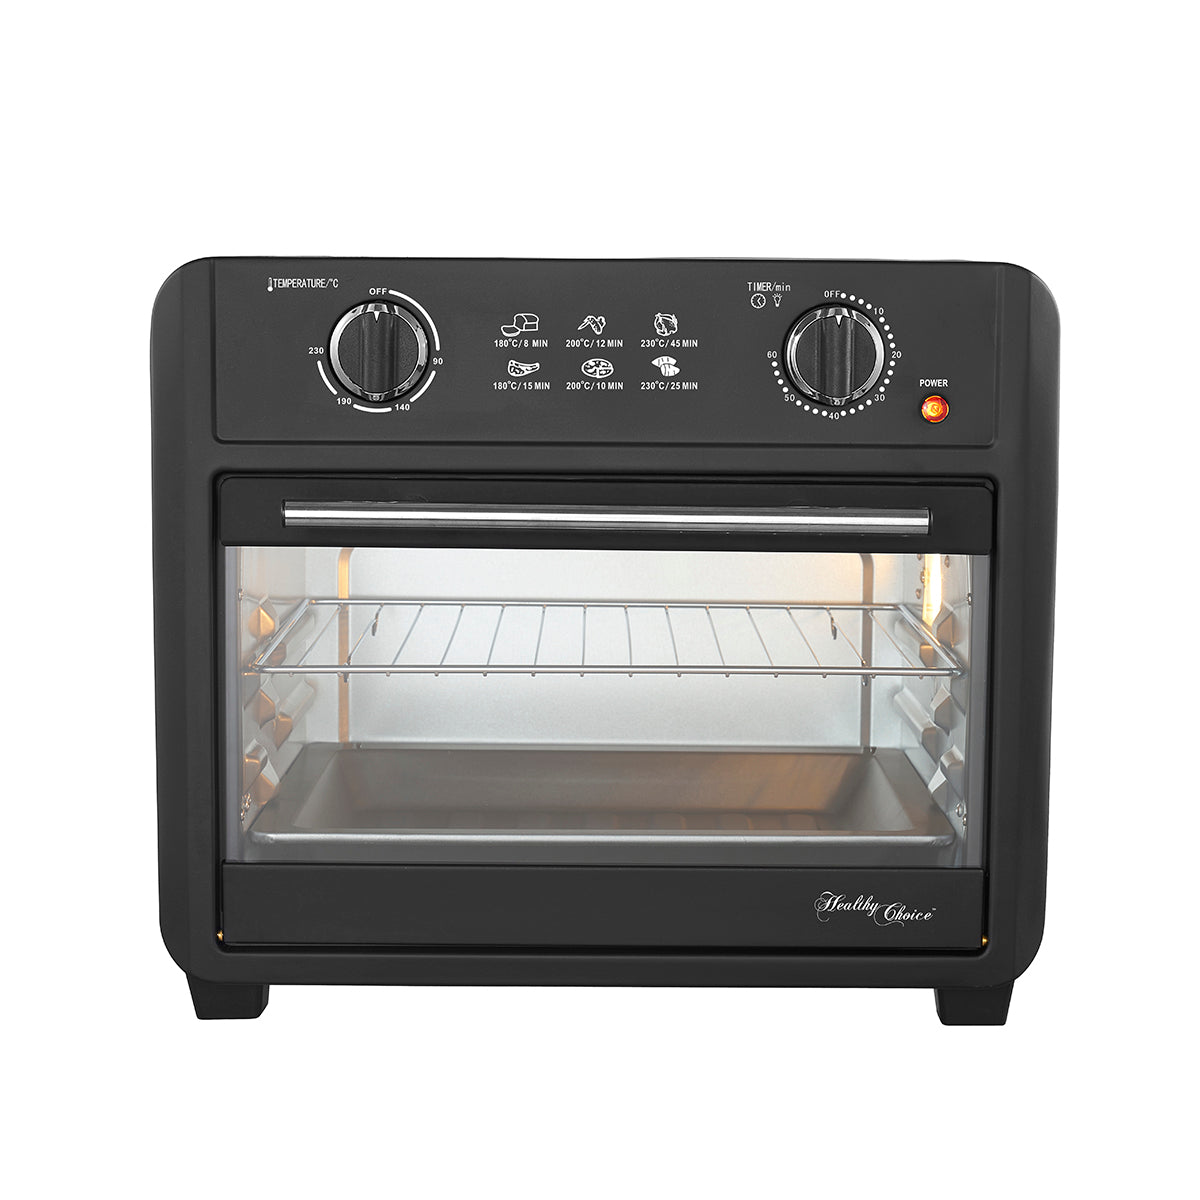 Front view of the AFO238 Black 23L Air Fryer Oven on white background.